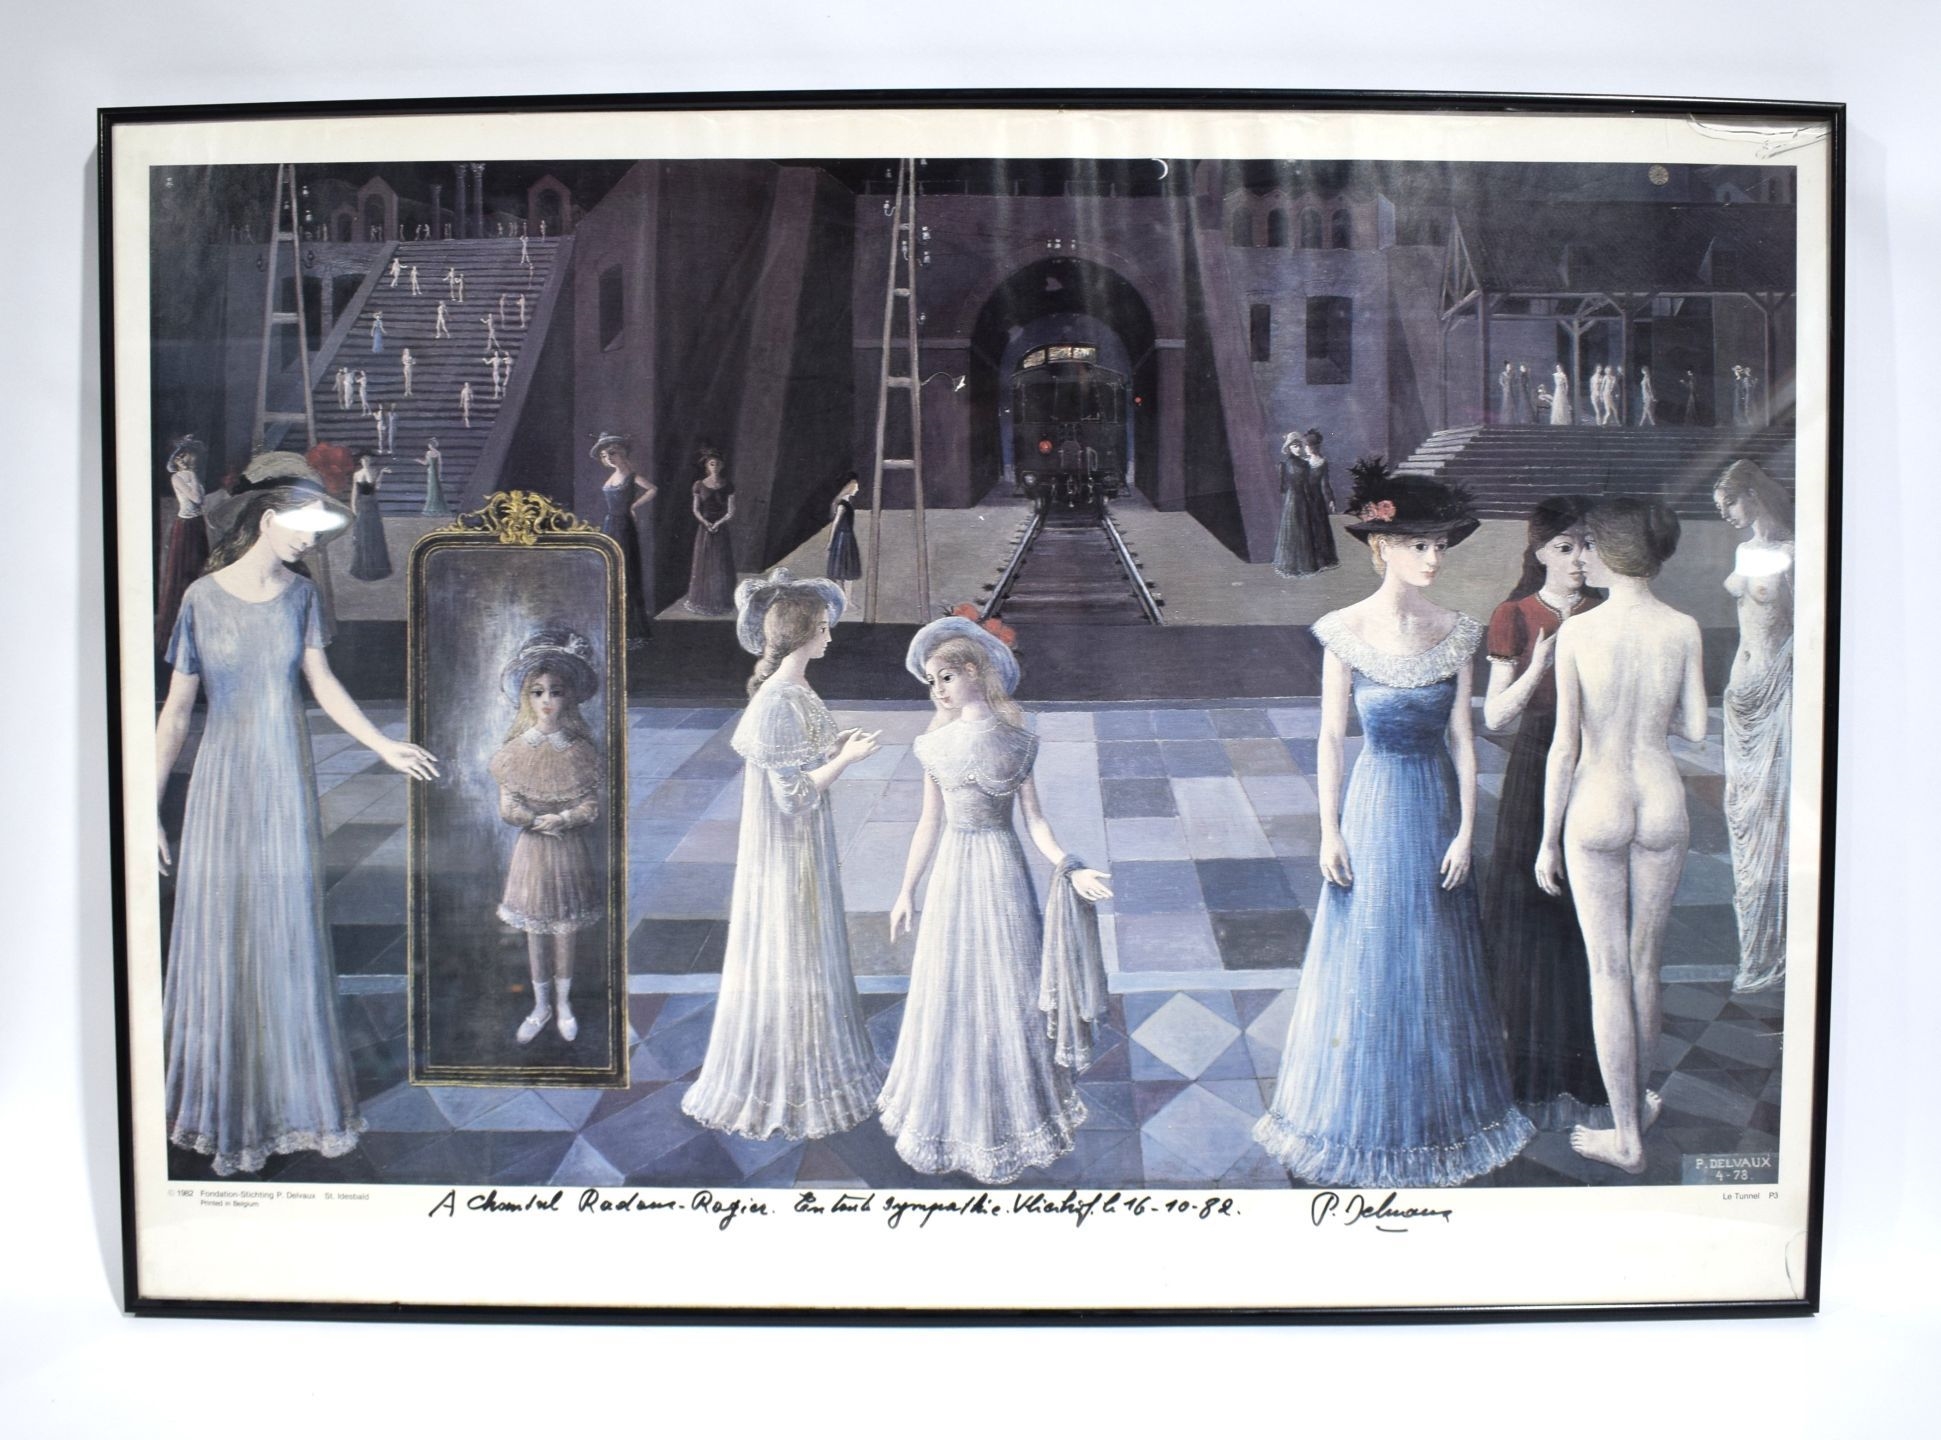 Artwork by Paul Delvaux, Paul Delvaux, Made of Poster